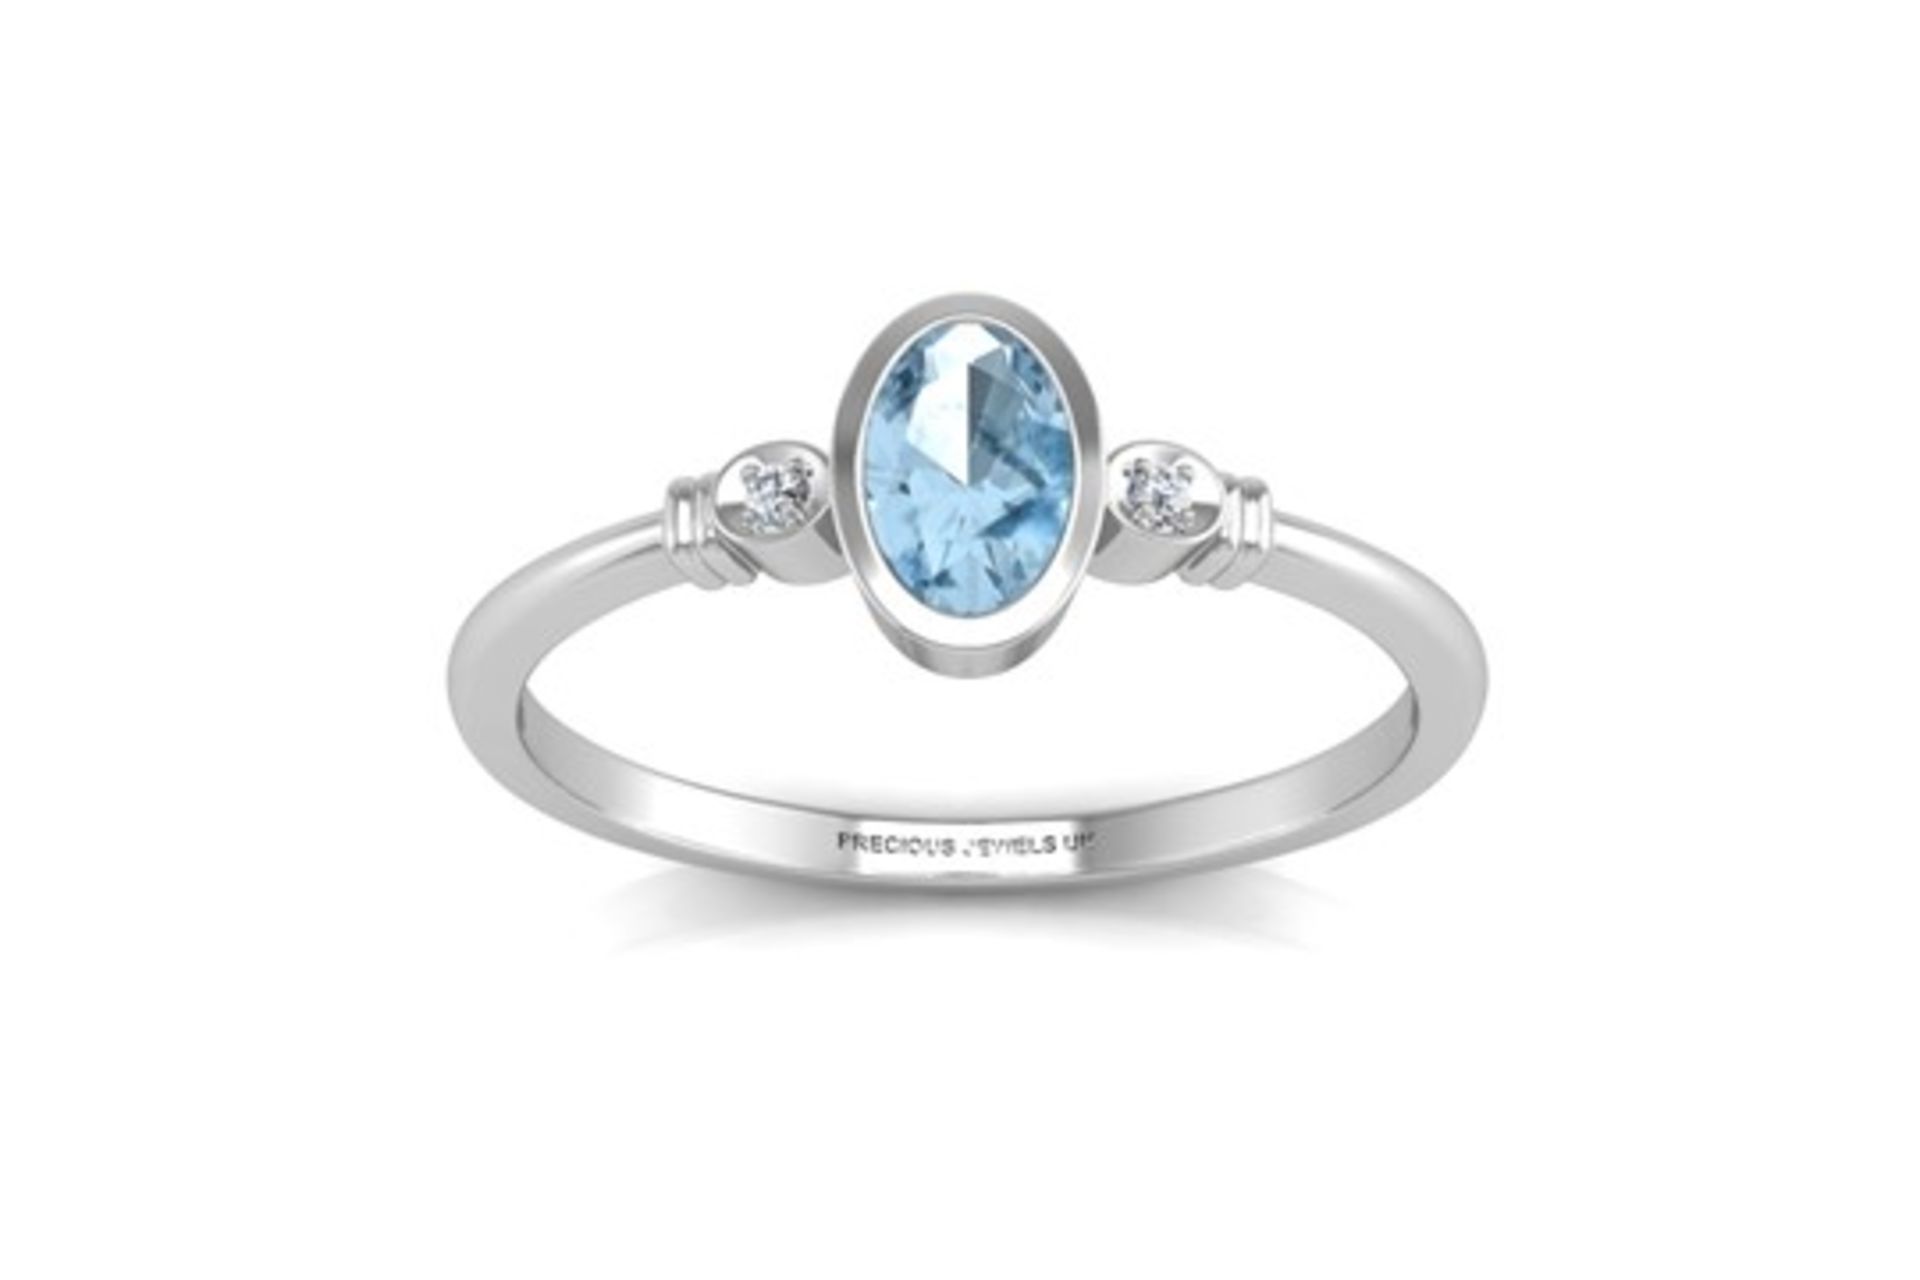 9ct White Gold Diamond And Oval Shape Blue Topaz Ring 0.01 Carats - Image 3 of 4